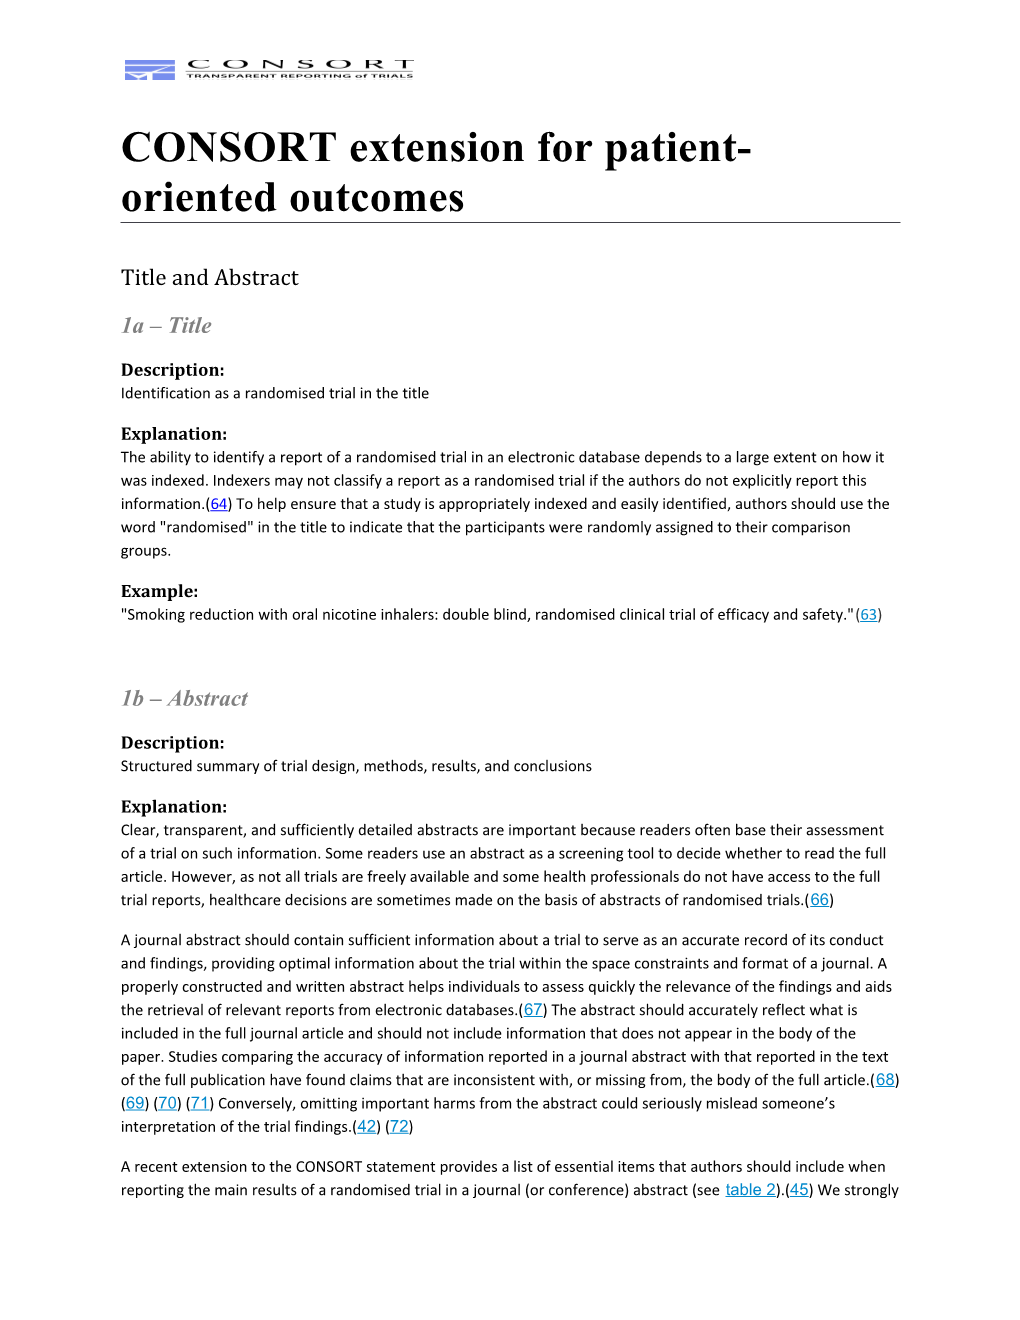 CONSORT Extension for Patient-Oriented Outcomes